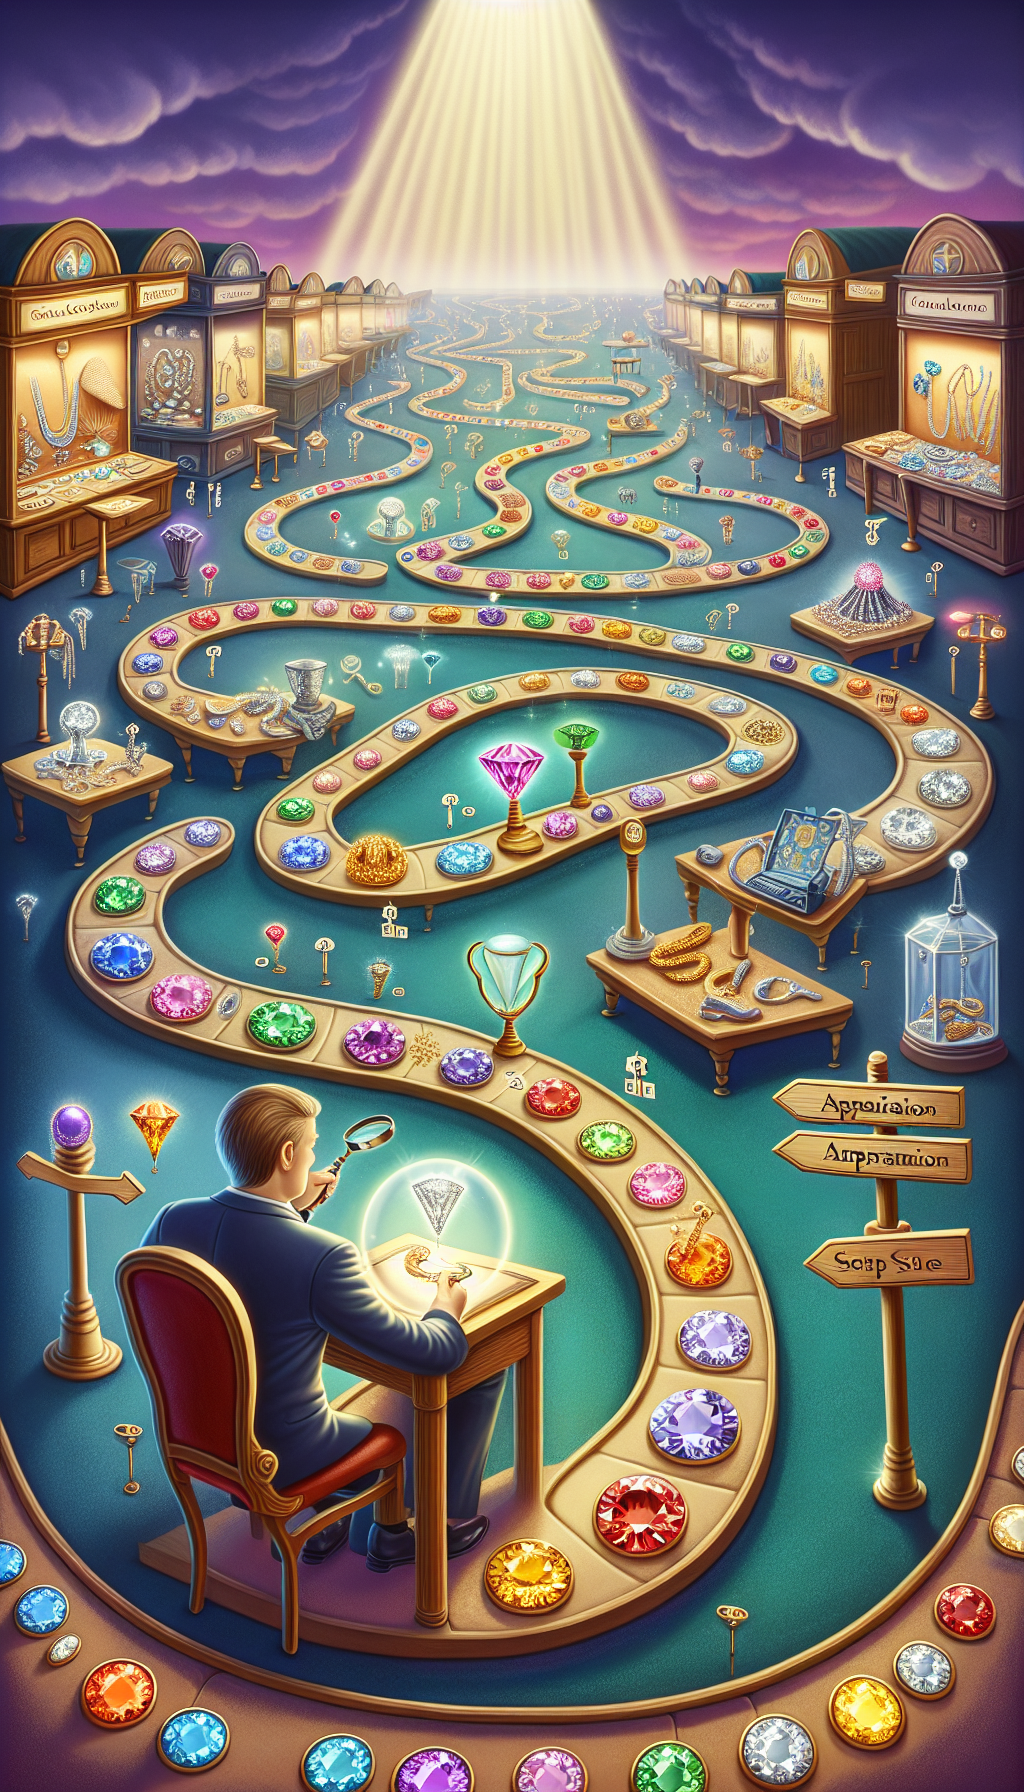 A whimsical treasure map unfurls, leading through gemstone-studded paths to a magnifying glass-armed expert appraiser at a jeweler's bench, while paths diverge toward bustling marketplaces and auction houses. The expert holds a gleaming piece of jewelry, signifying the beginning of an appraisal, with signs pointing to various selling destinations, encapsulating the dual journey of assessment and sale.